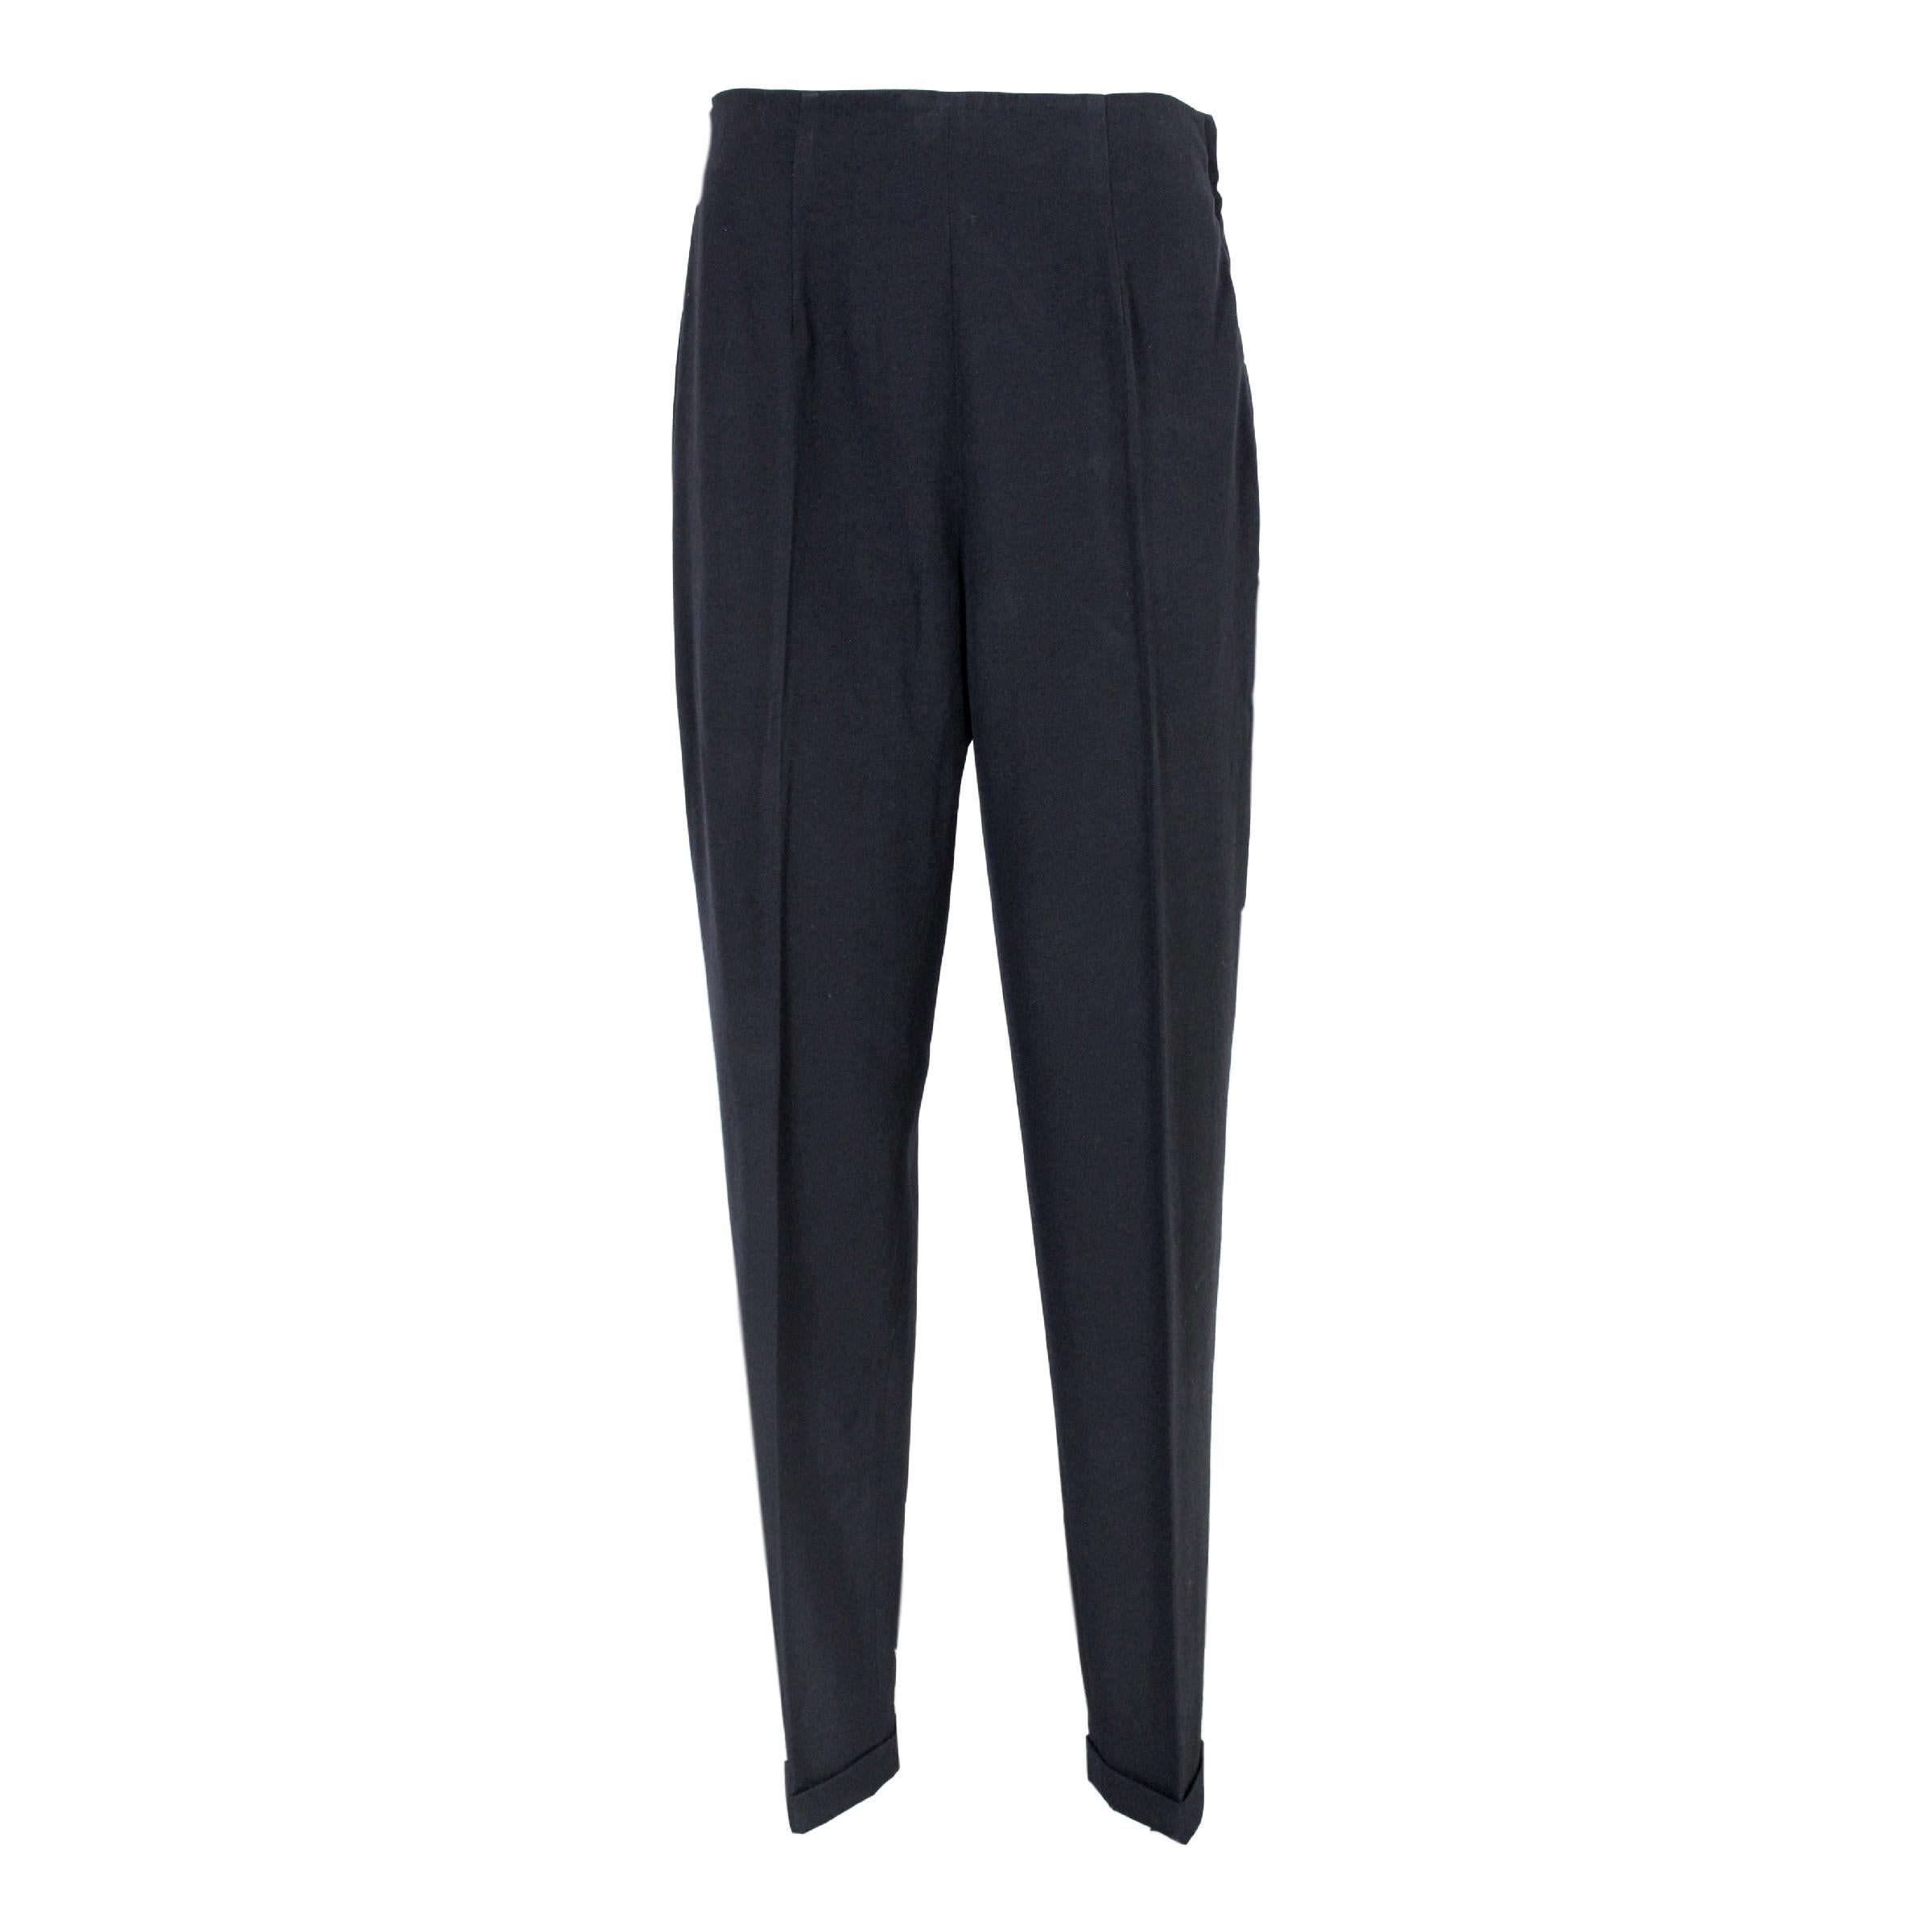 Katharine Hamnett women's vintage trousers - a timeless piece that exudes elegance and sophistication. Crafted from 100% wool and made in Italy, these trousers feature a straight palace model, high waist design, and come in classic black color.